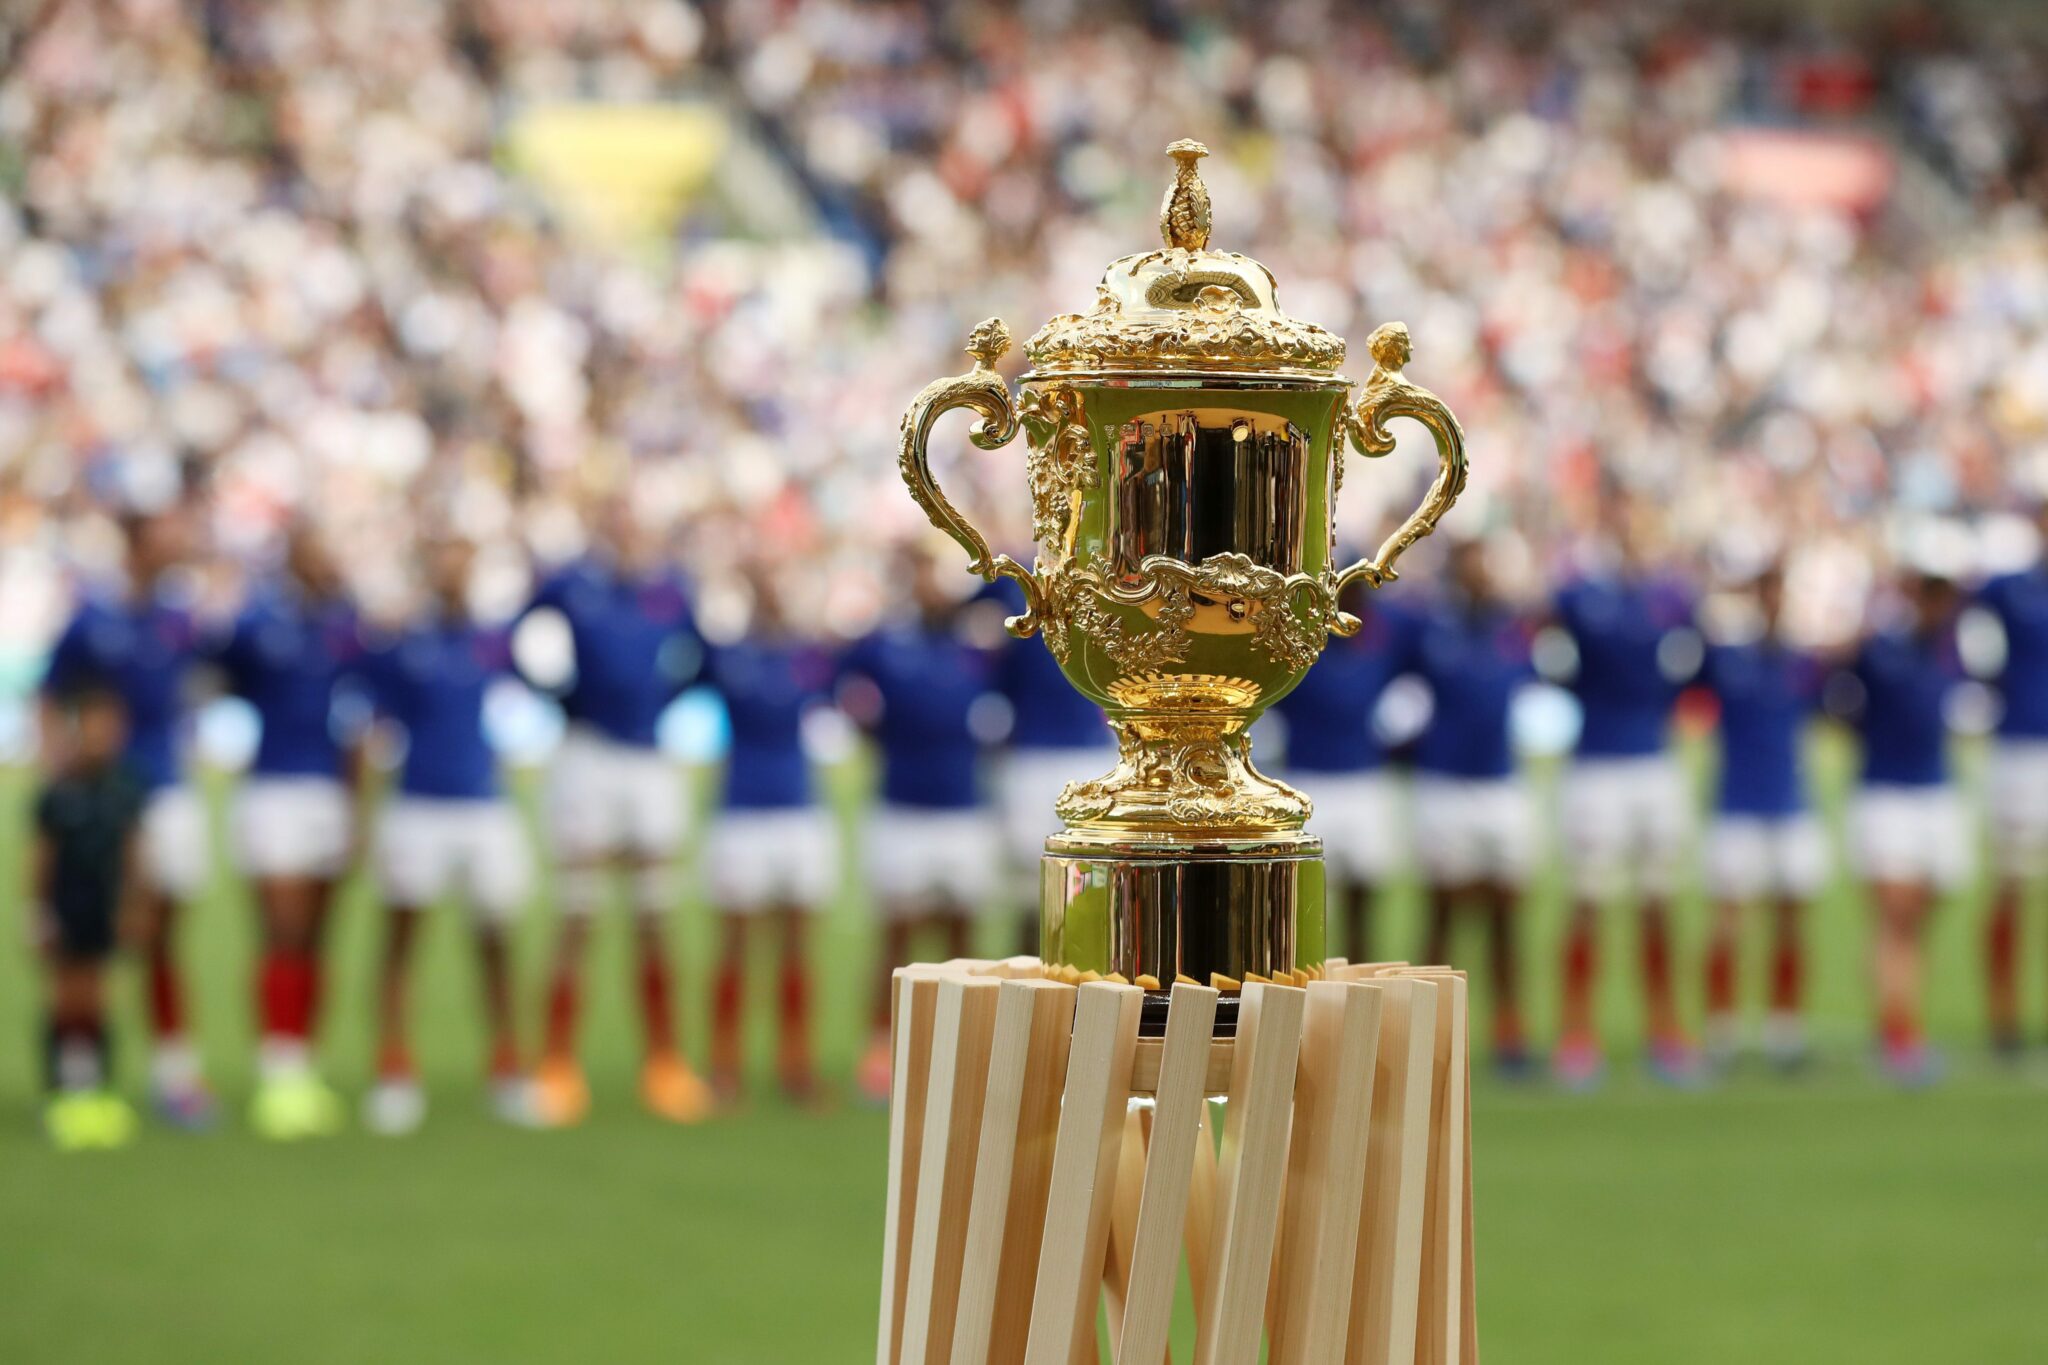 Rugby World Cup trophy on stand in the stadium infront of the players